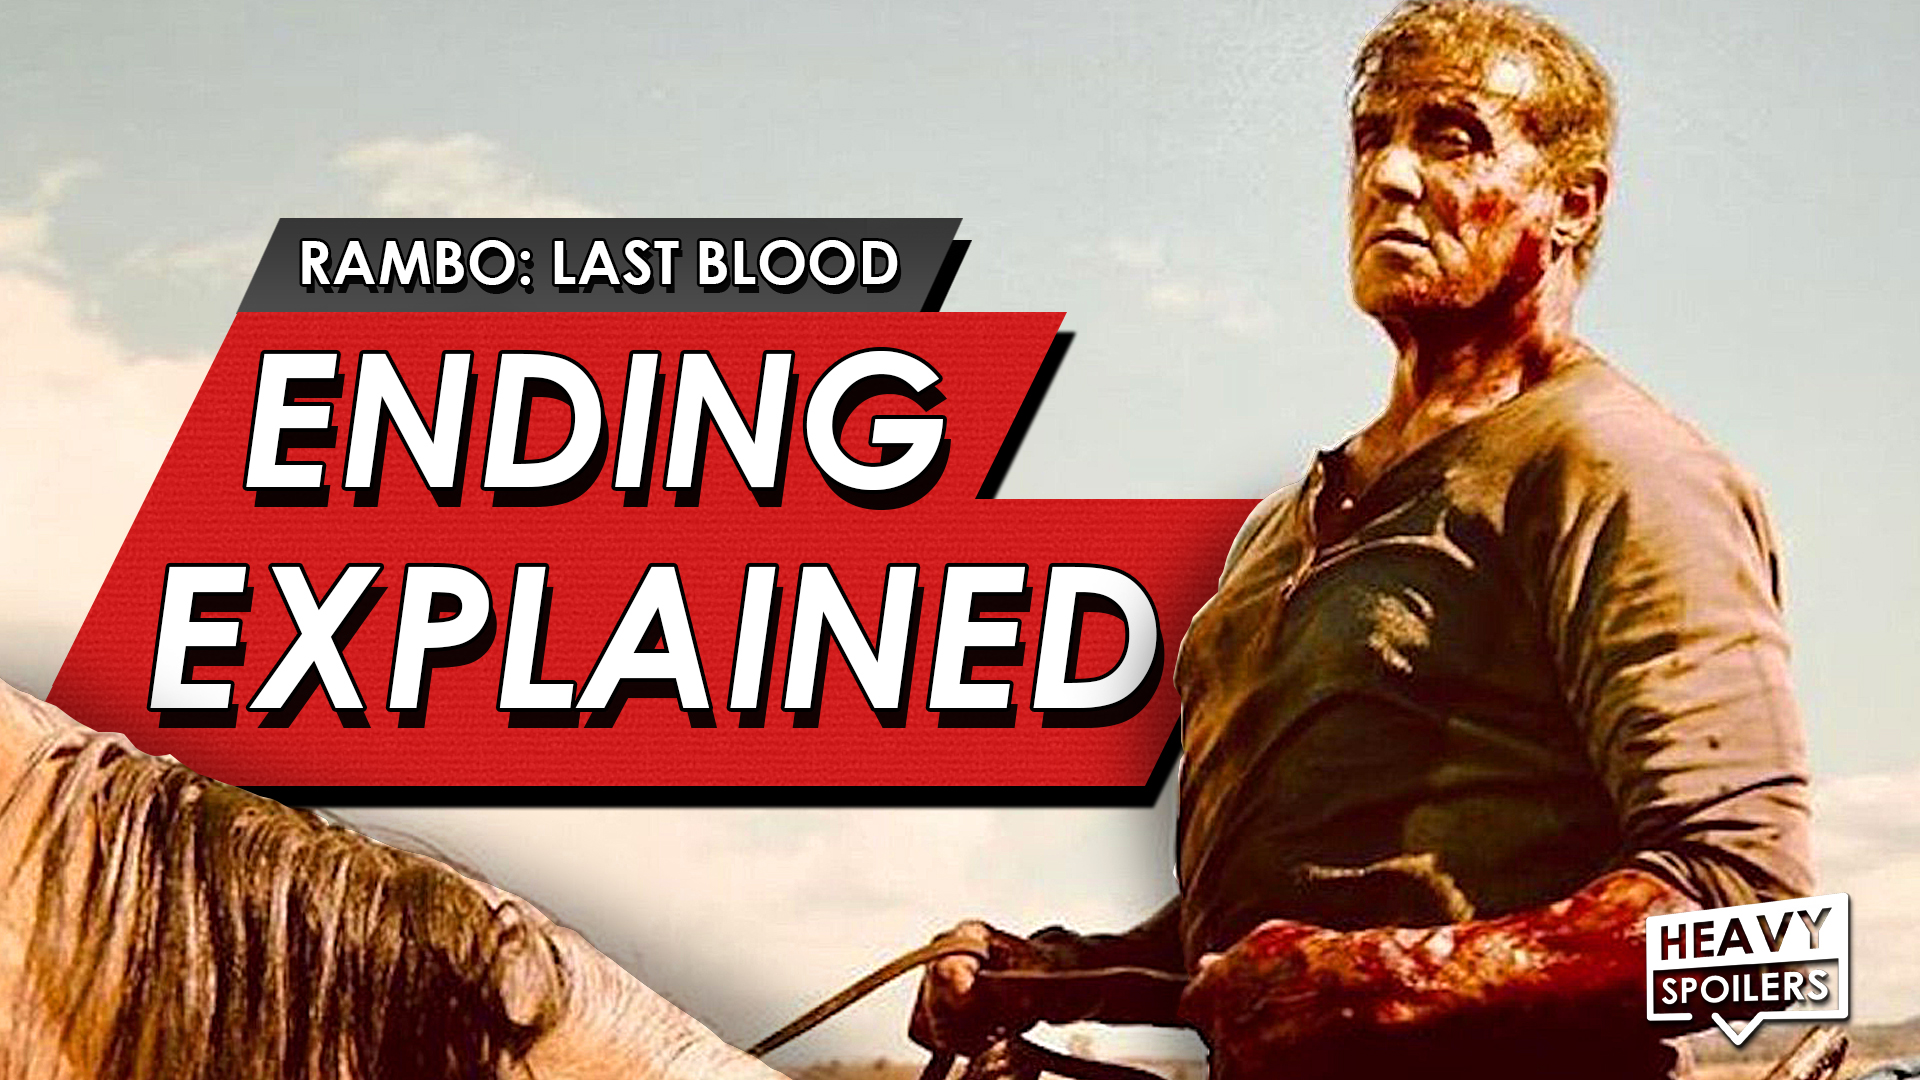 rambo last blood ending explained full movie spoiler talk breakdown and action scenes all clips and trailers bad ign review offended